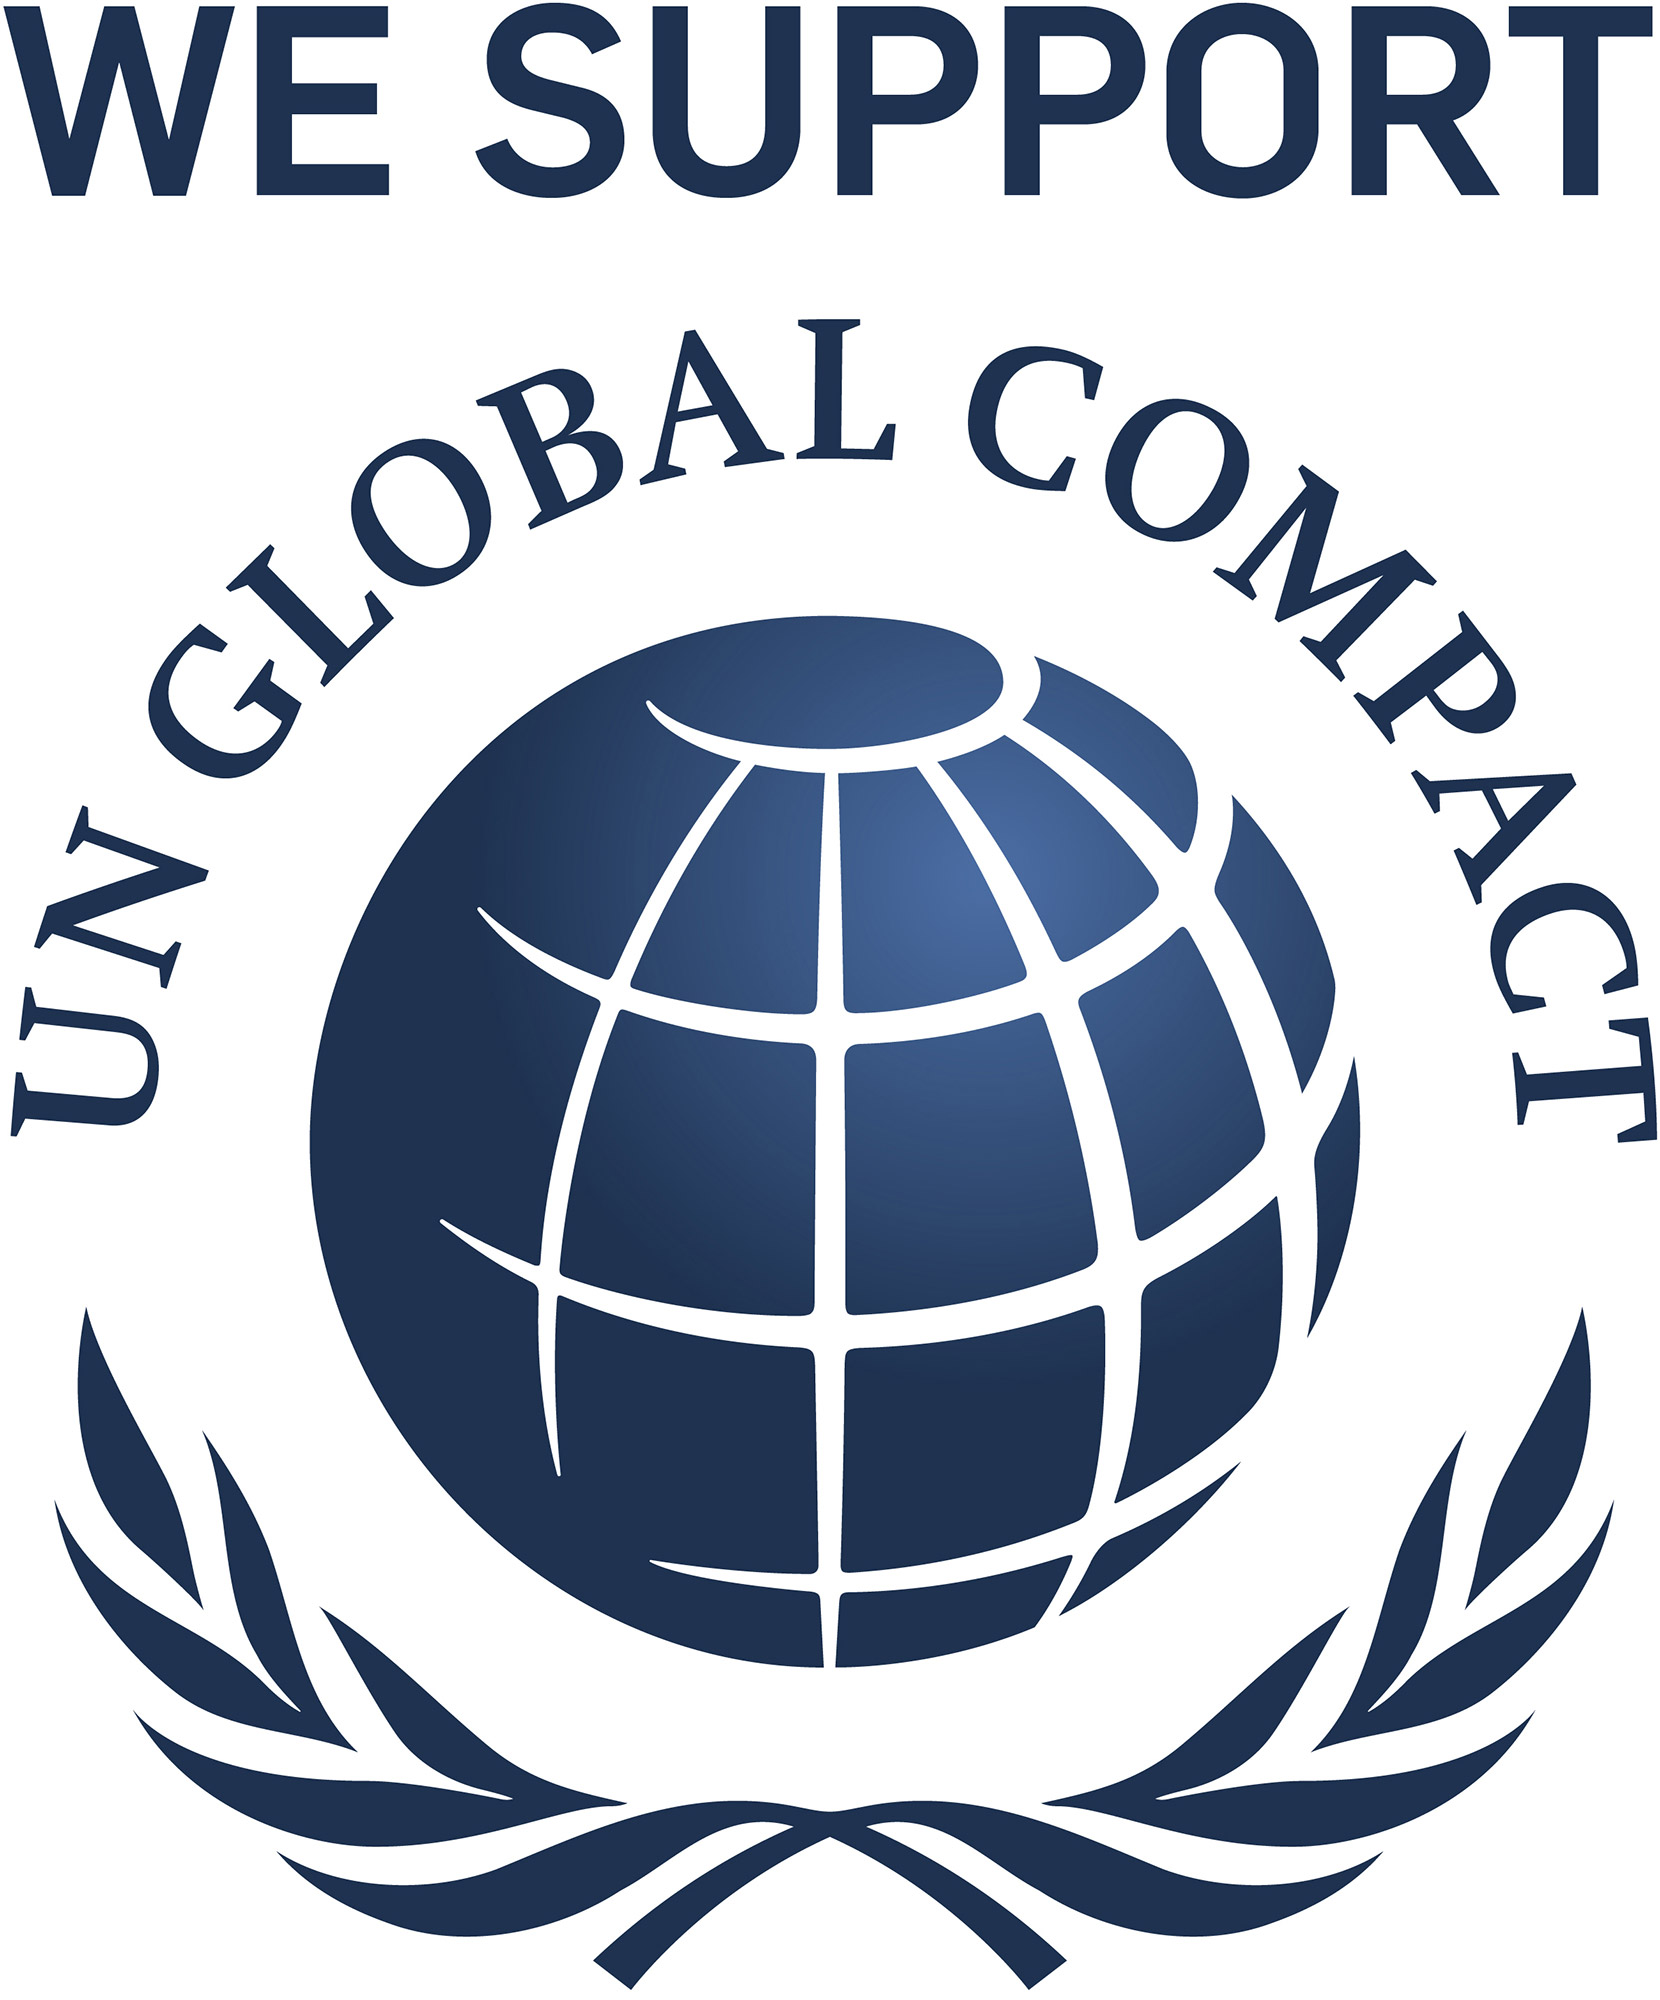 Our CSR efforts - towards our employees and our business partners - ultimately serve one overarching purpose: to make the world a better place for everyone.
In 2018, we joined the <a href="https://unglobalcompact.org/" target="_blank">United Nations Global Compact</a>, the world’s largest sustainability initiative with more than 10,000 companies that endorse the Ten Principles. Each year, we publish our Communication On Progress to transparently show the areas where we improve.